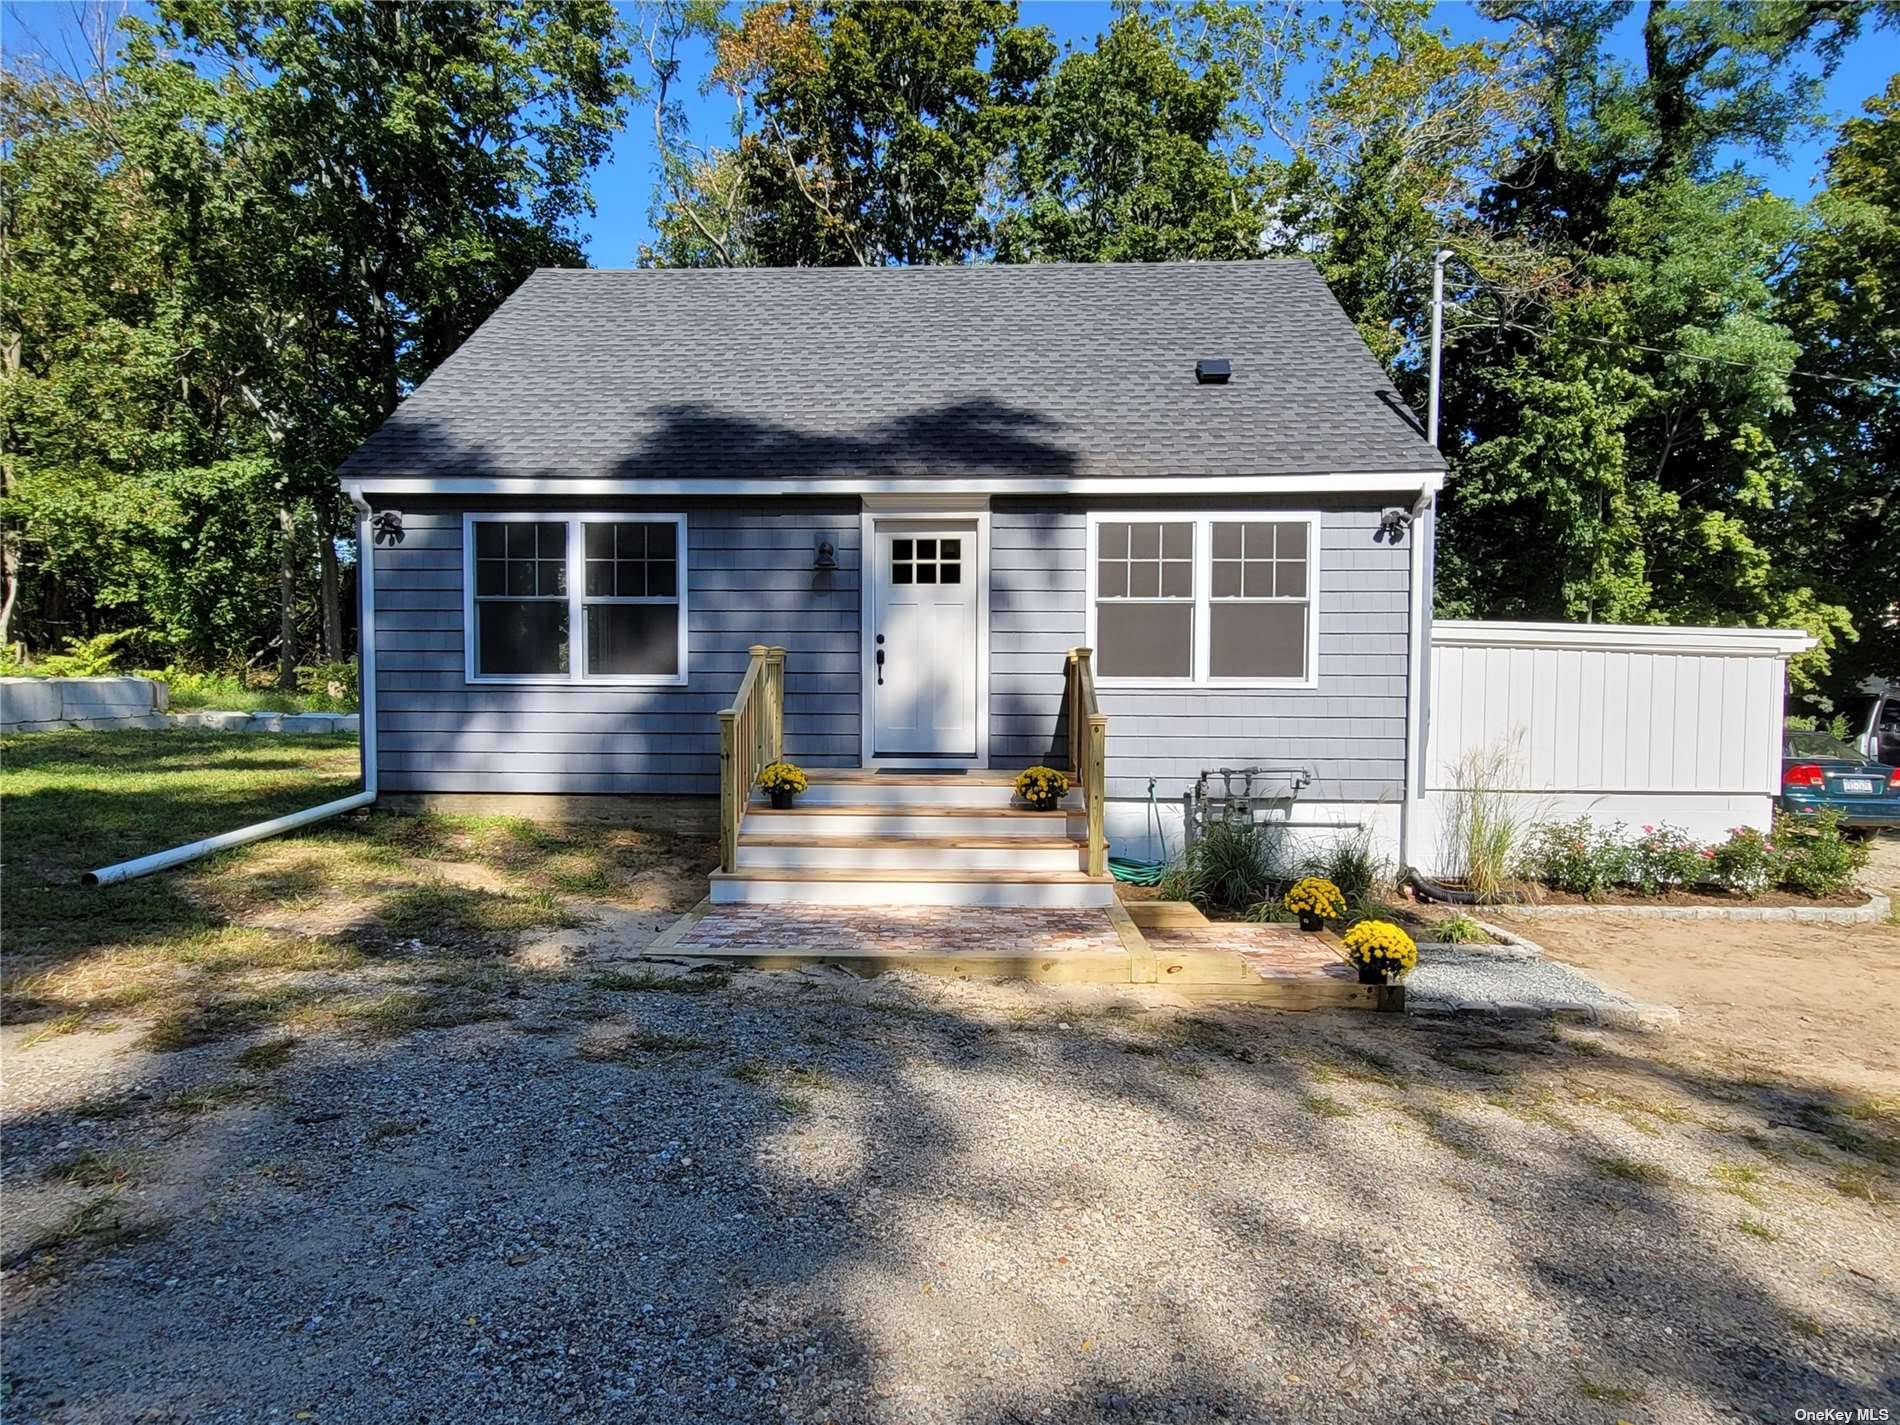 Completely renovated, spray foam insulation for energy efficiency, all new plumbing, electric, HVAC systems, hardwood floors, bathrooms and appliances all on 1 acre flag lot property with dual zoning with ...